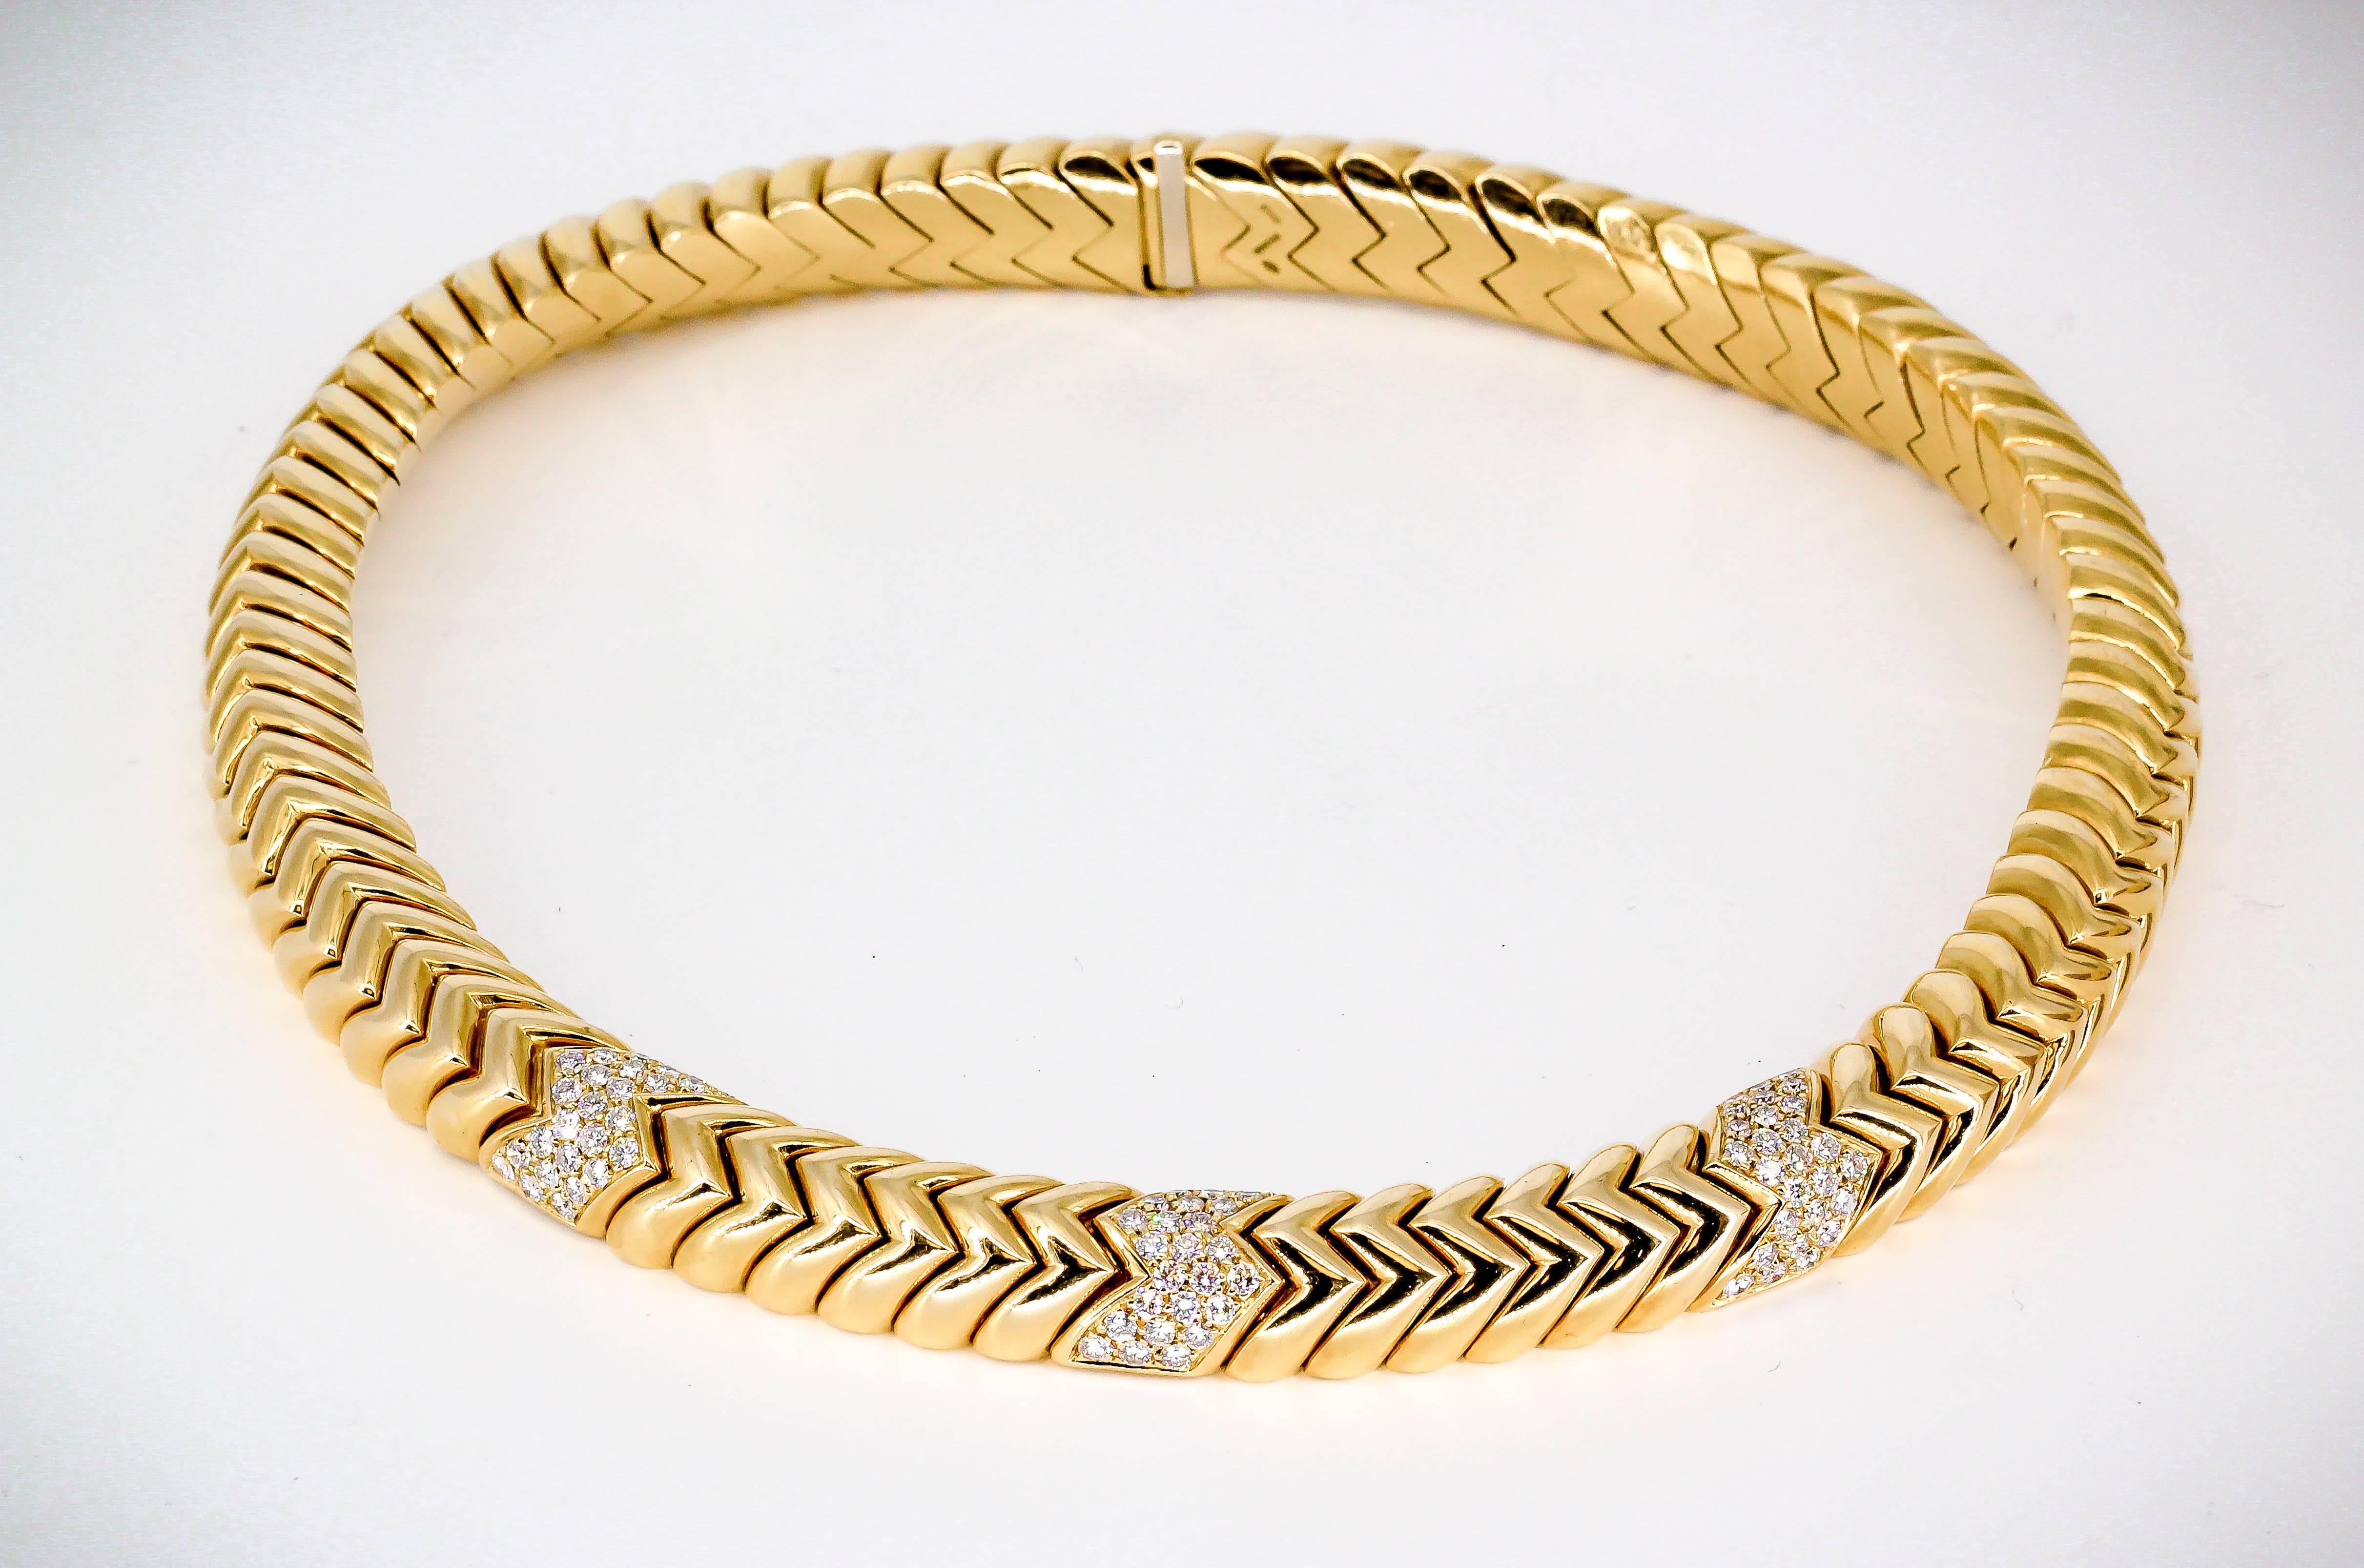 Elegant diamond and 18K yellow gold necklace from the "Spiga" collection by Bulgari. It features approx. 4.0-4.5cts of high grade round brilliant cut diamonds. Necklace comes in a variety of sizes and we believe this one to be the heaviest